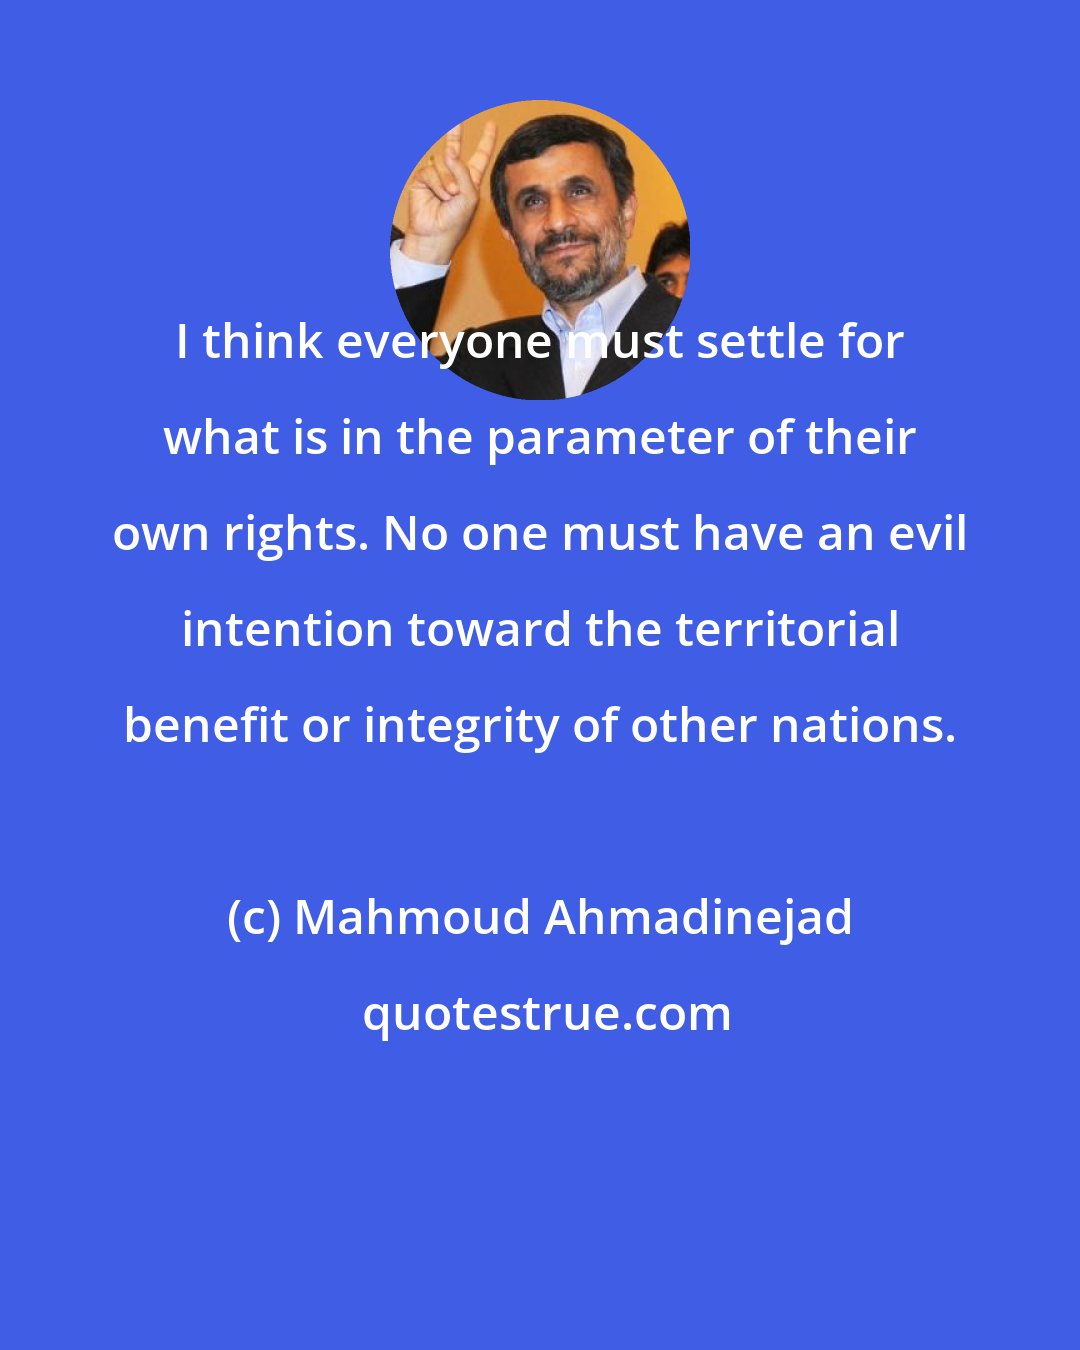 Mahmoud Ahmadinejad: I think everyone must settle for what is in the parameter of their own rights. No one must have an evil intention toward the territorial benefit or integrity of other nations.